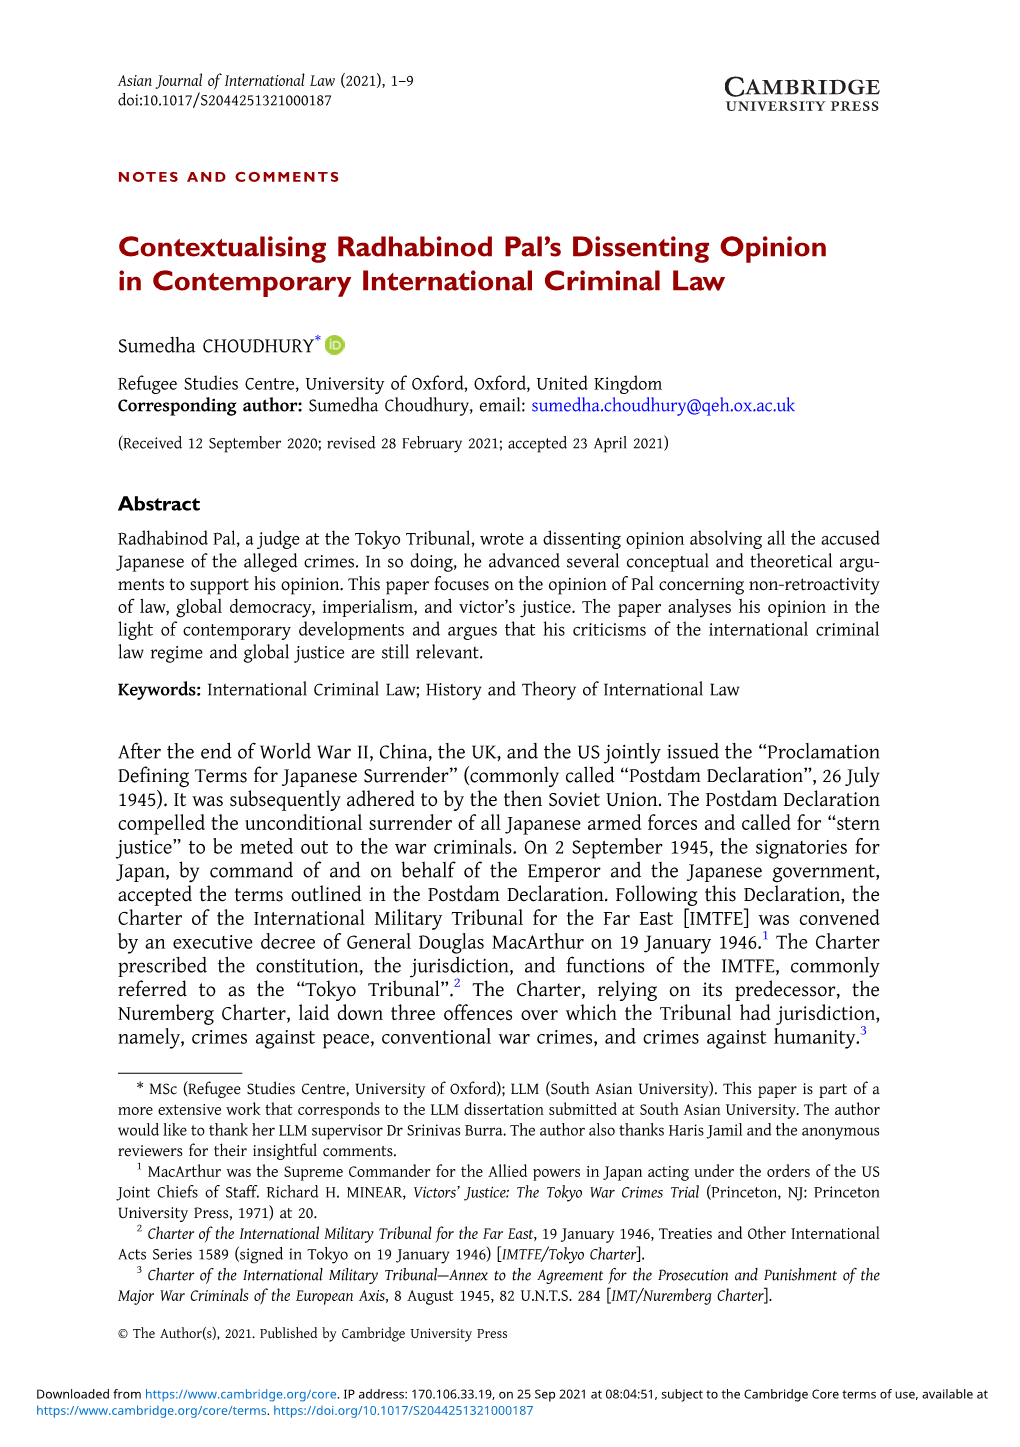 Contextualising Radhabinod Pal's Dissenting Opinion In